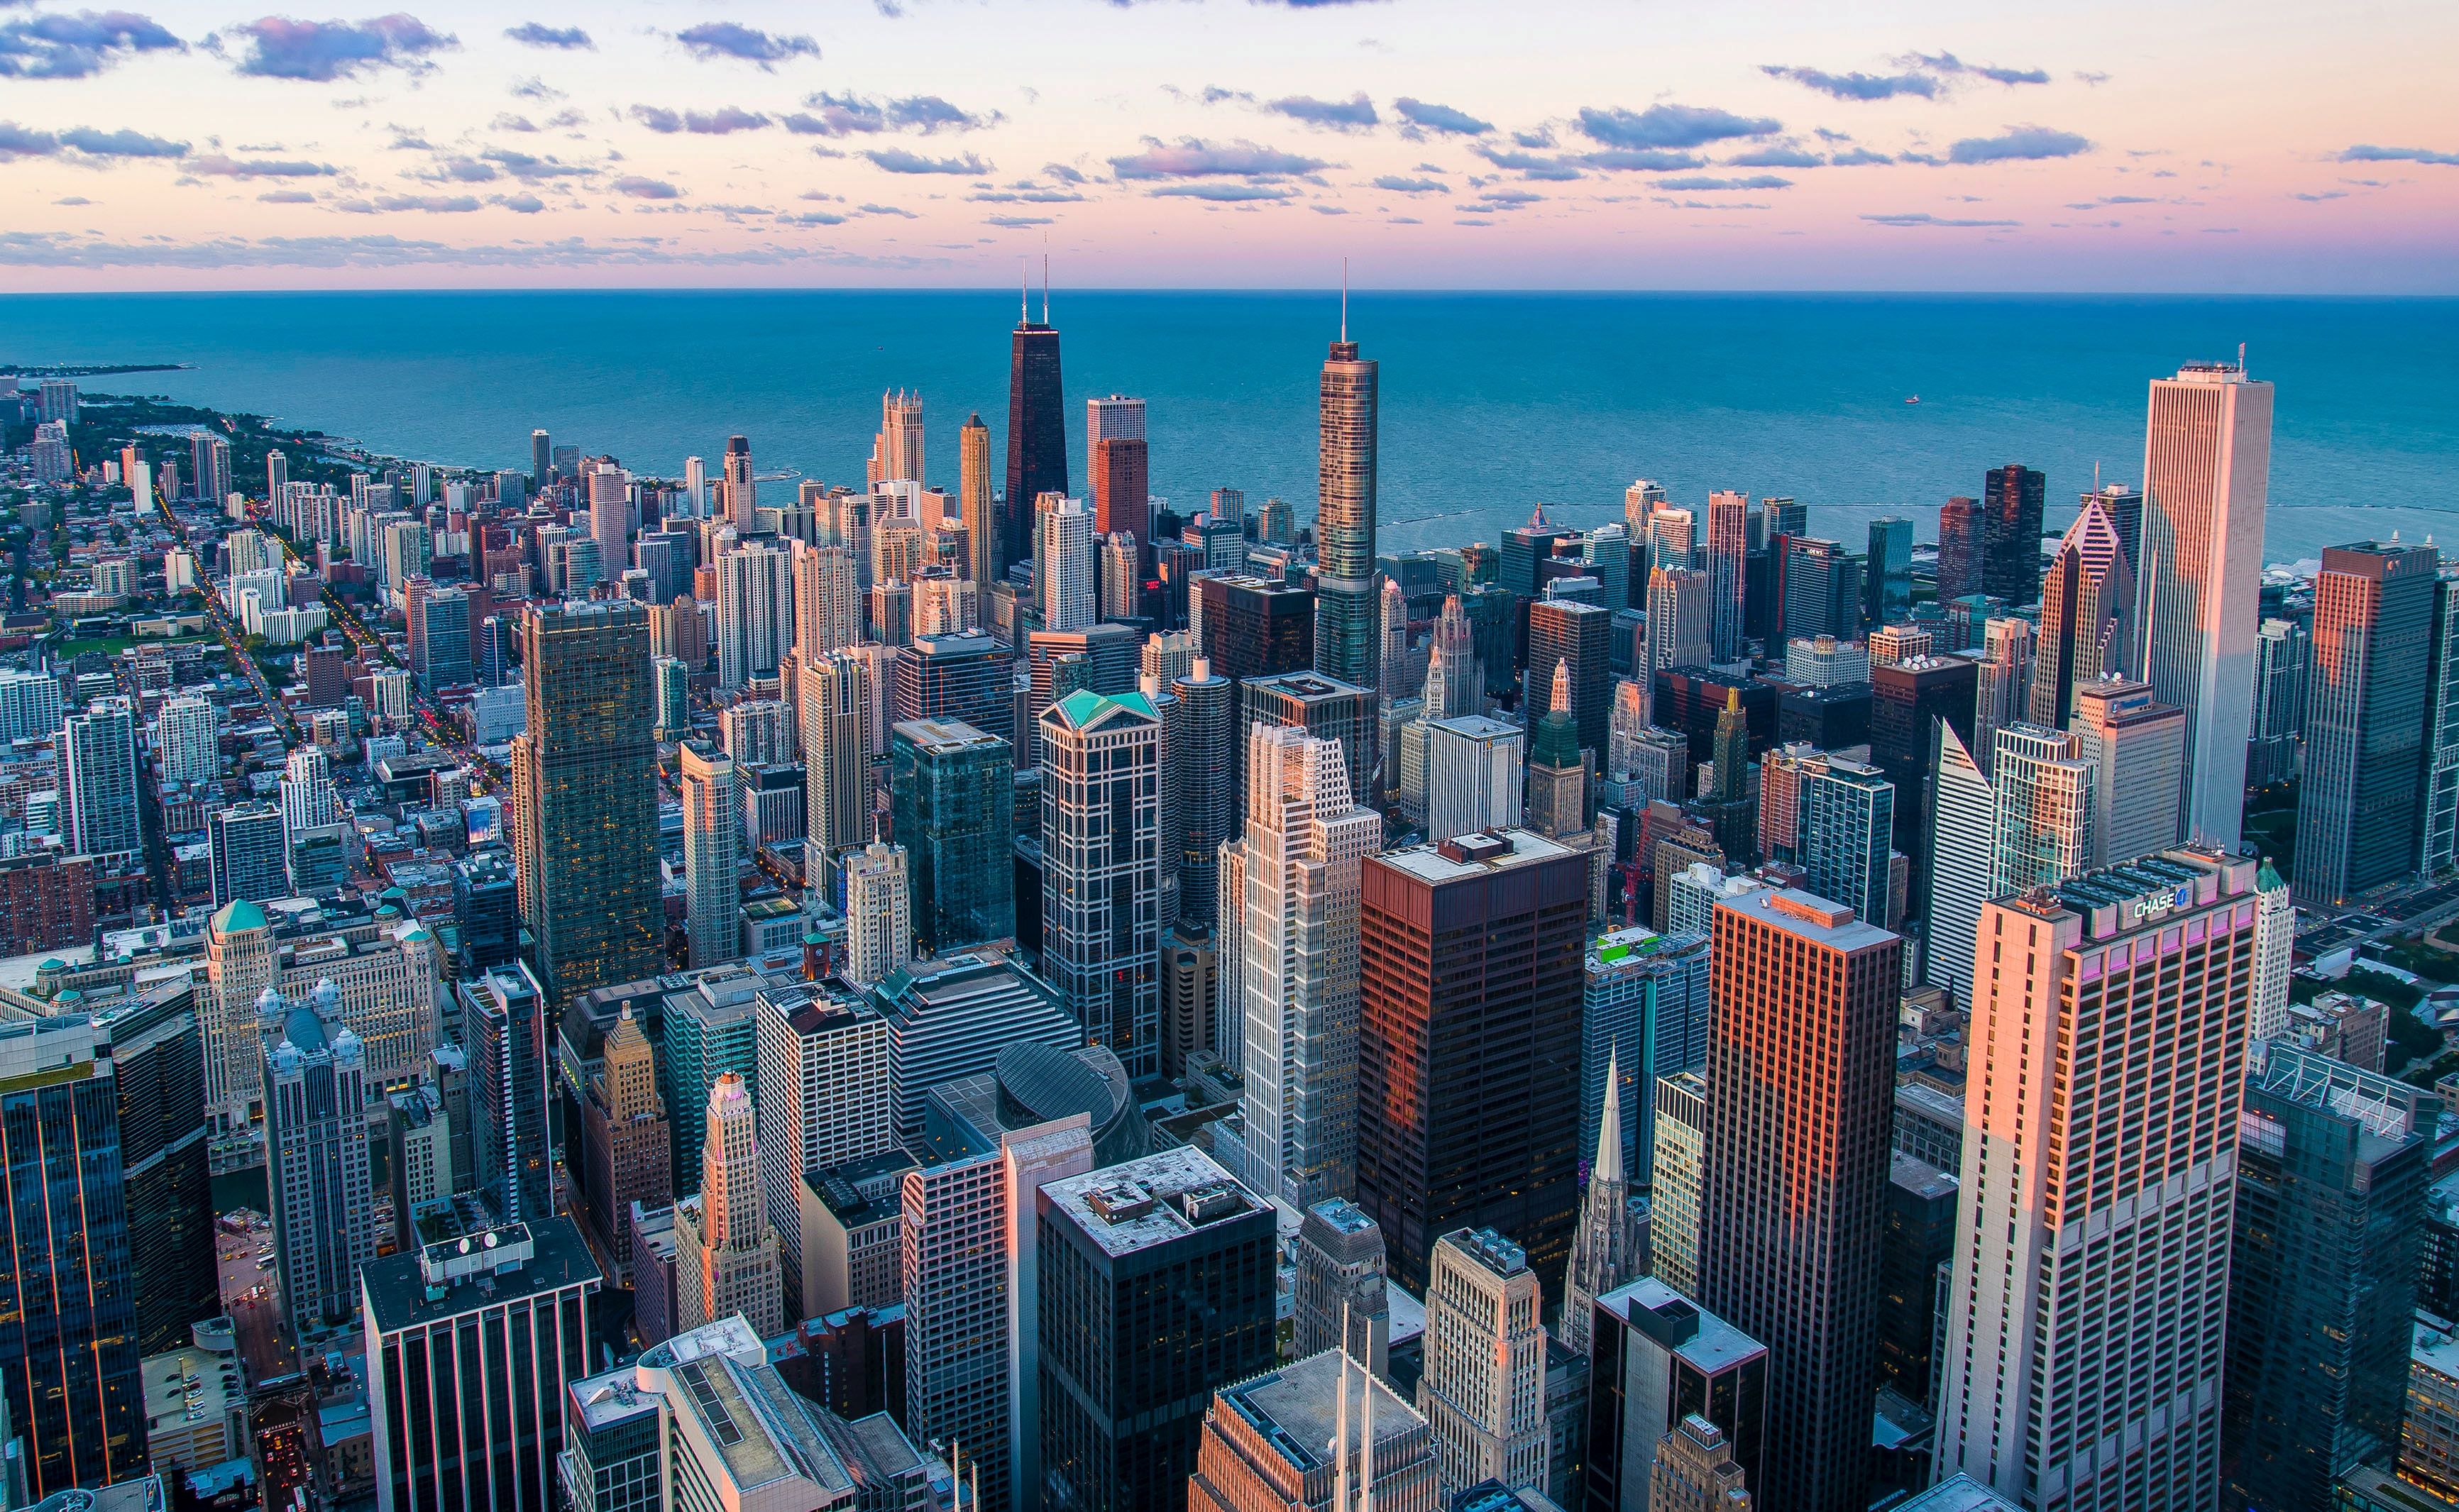 A photo of the Chicago skyline